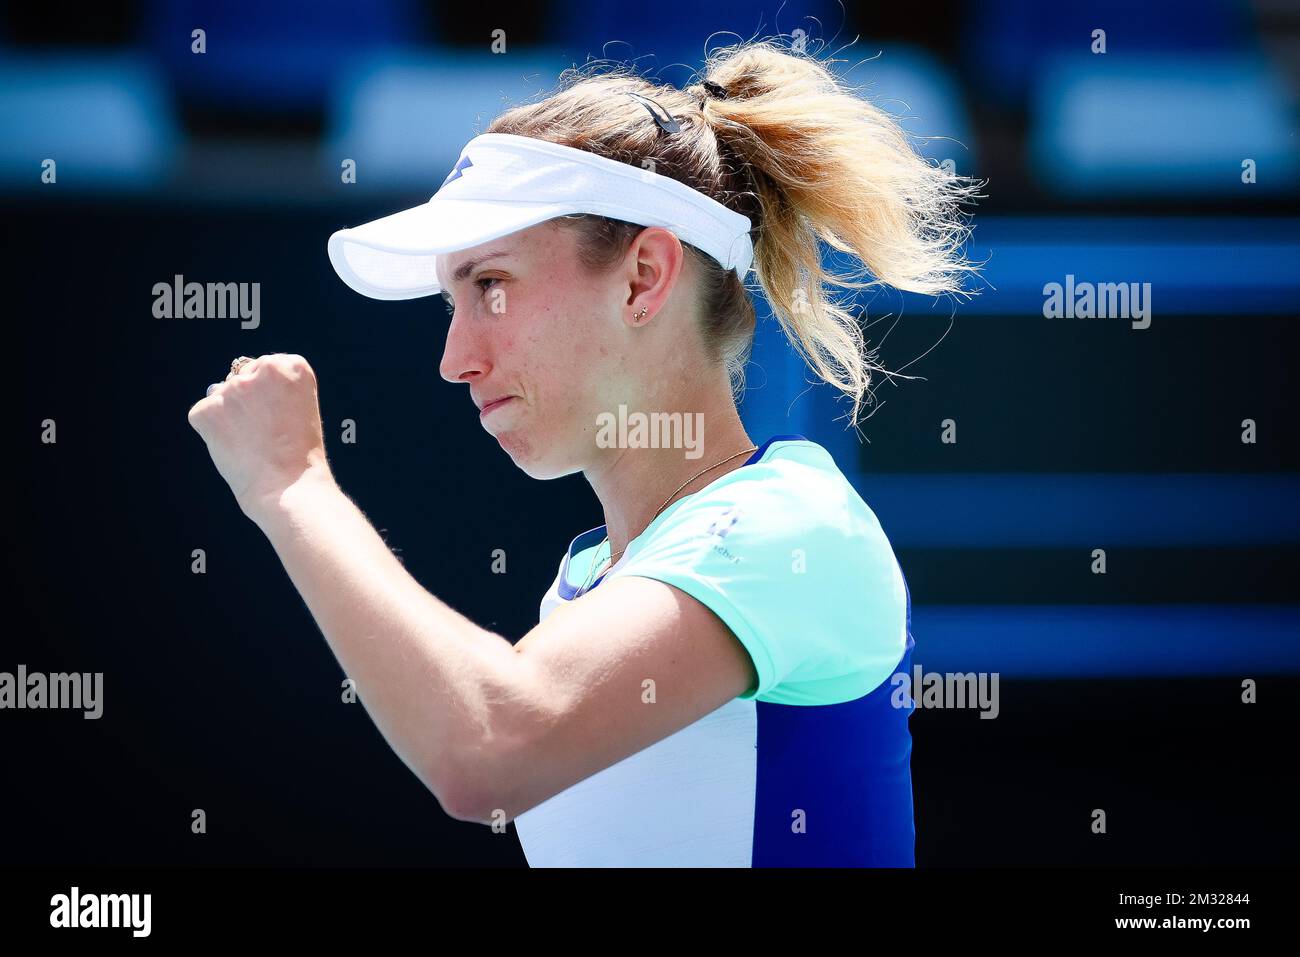 Belgian Elise Mertens pictured during a tennis match between Belgian-Belarussian pair Mertens-Sabalenka and Chinese Taipei pair Hao-Ching Chan and Latisha Chan, in the quarterfinals of the women's doubles competition of the 'Australian Open' tennis Grand Slam, Tuesday 28 January 2020 in Melbourne Park, Melbourne, Australia. Stock Photo